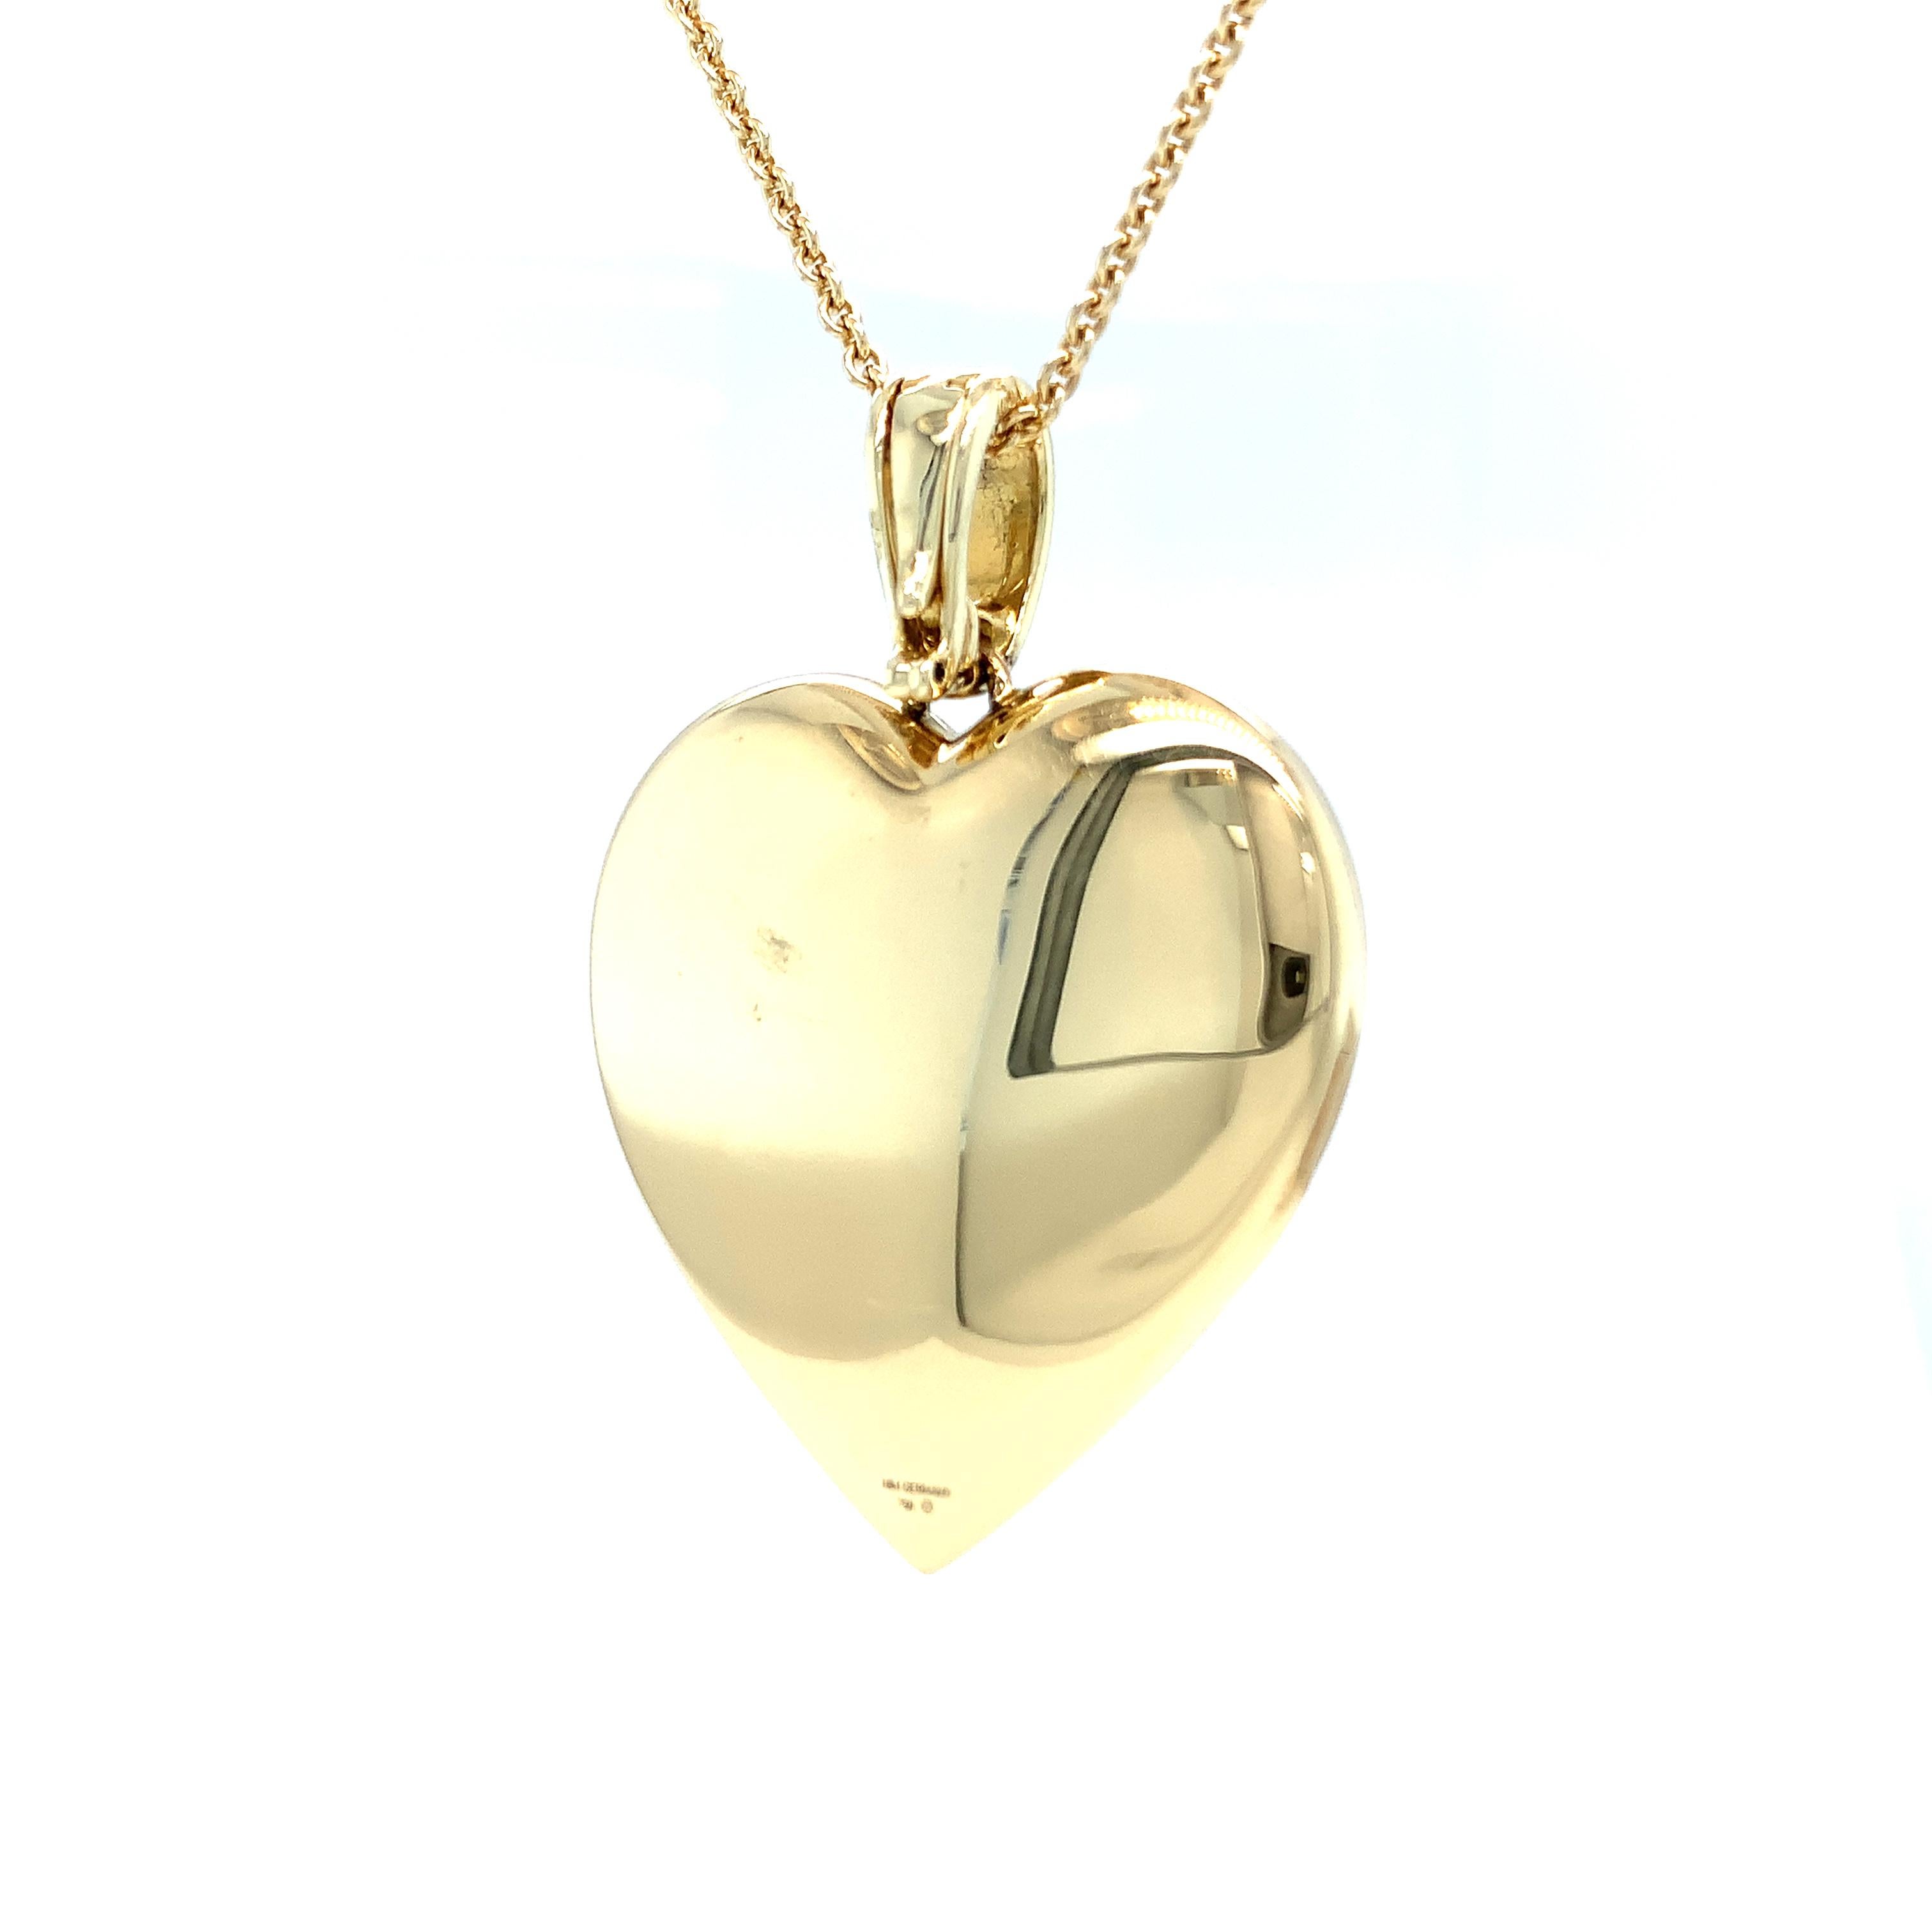 Contemporary Customizable Polished Heart Shaped Pendant Locket 18k Yellow Gold 37 mm x 34 mm For Sale